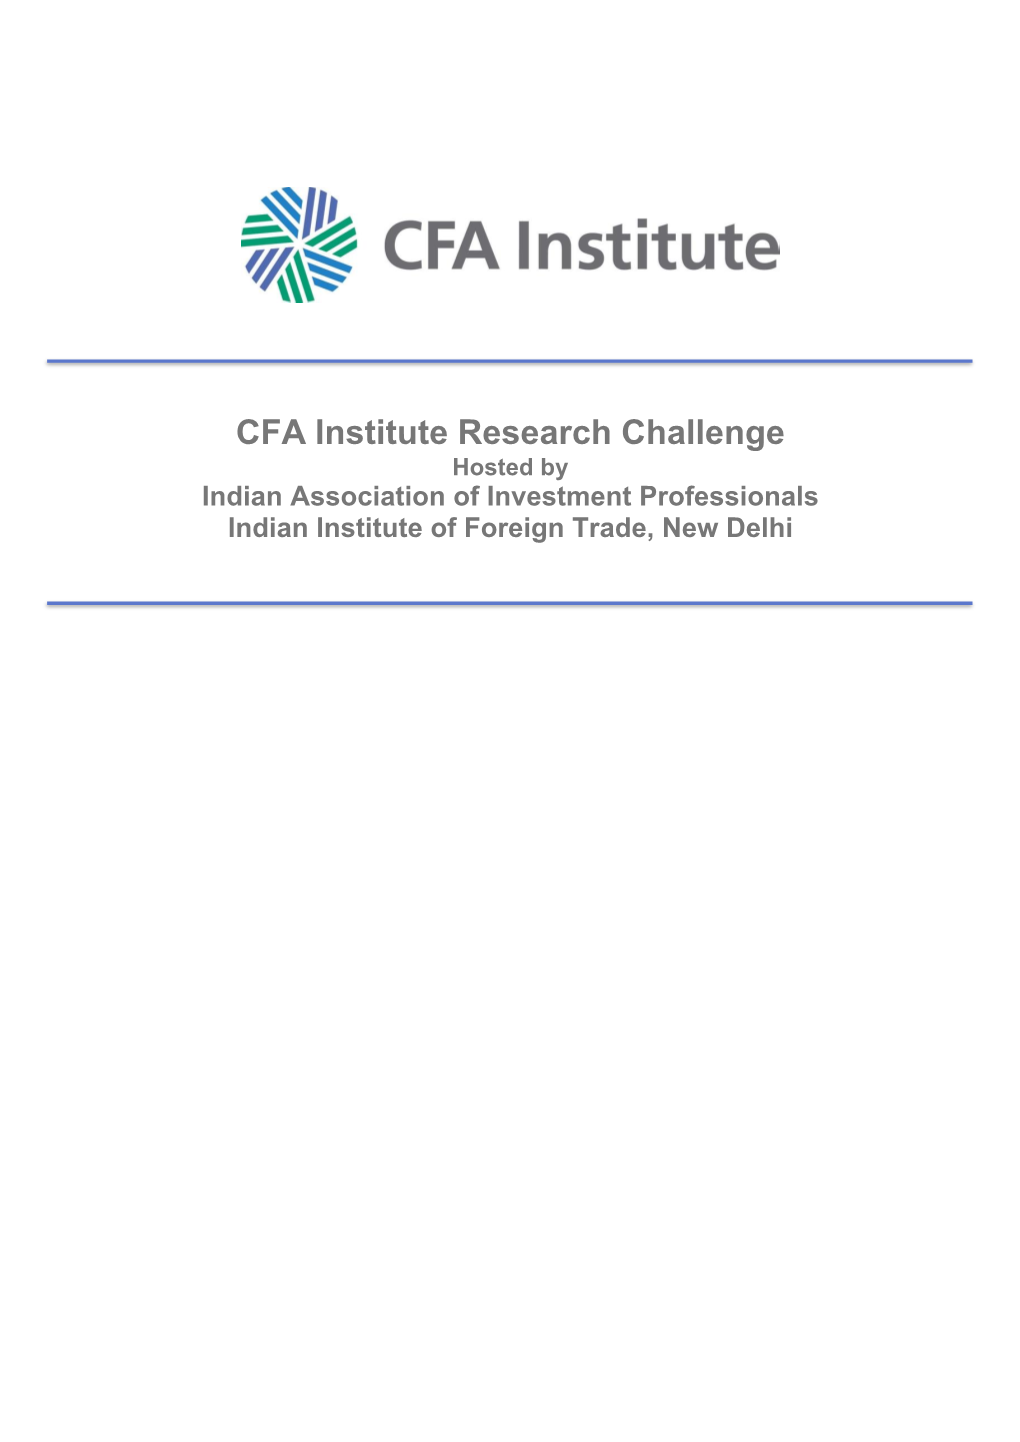 CFA Institute Research Challenge Hosted by Indian Association of Investment Professionals Indian Institute of Foreign Trade, New Delhi 1